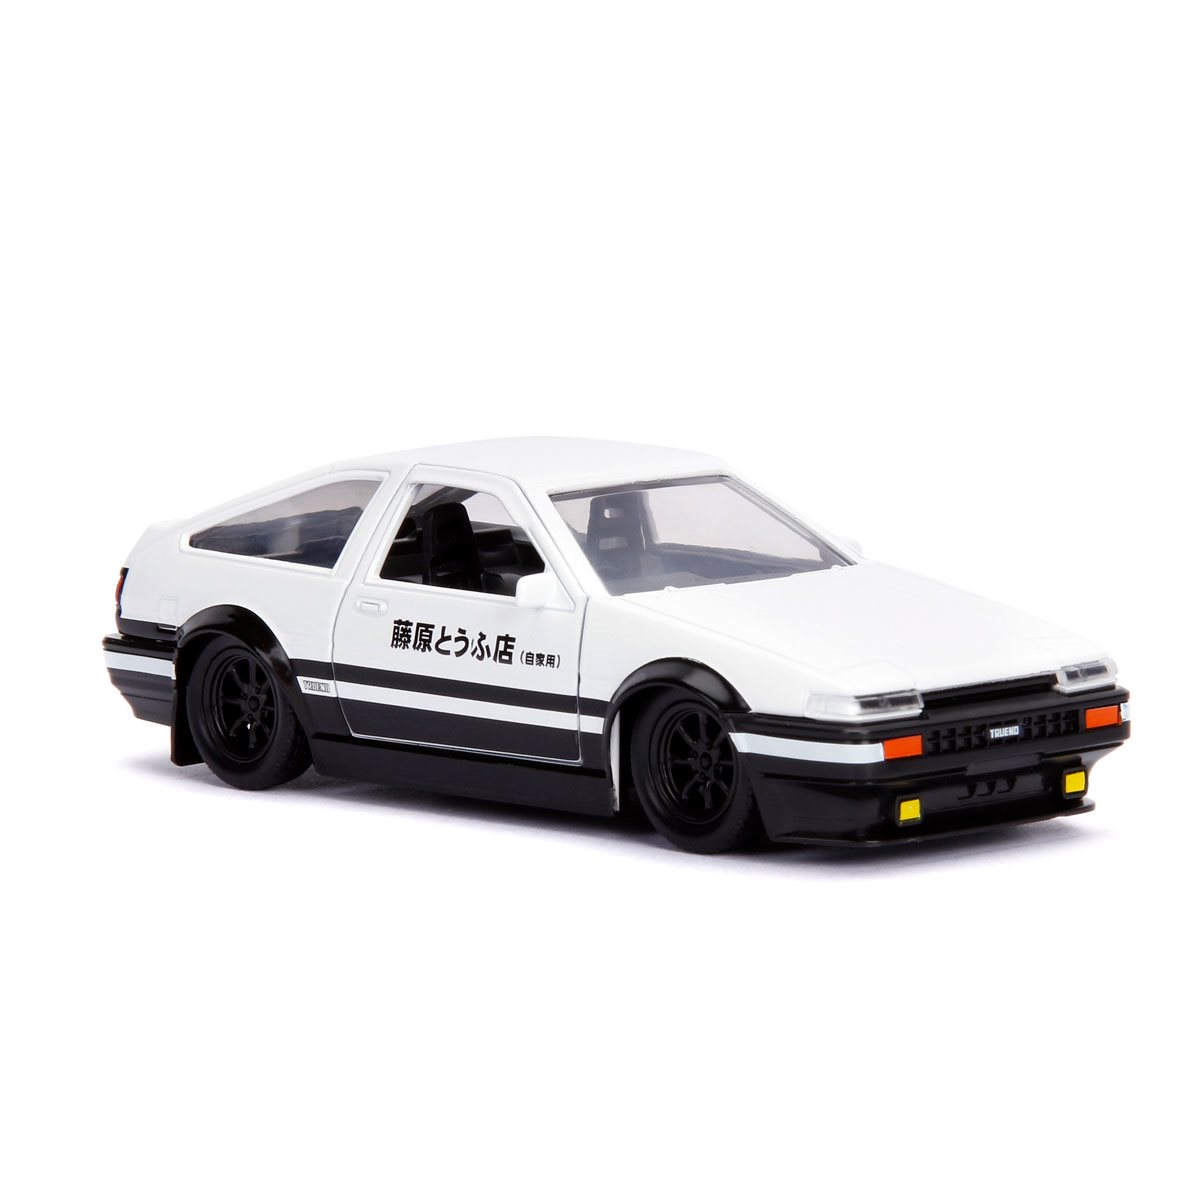 Hollywood Rides INITIAL D 1986 Toyota Trueno AE86 1/32 Scale 